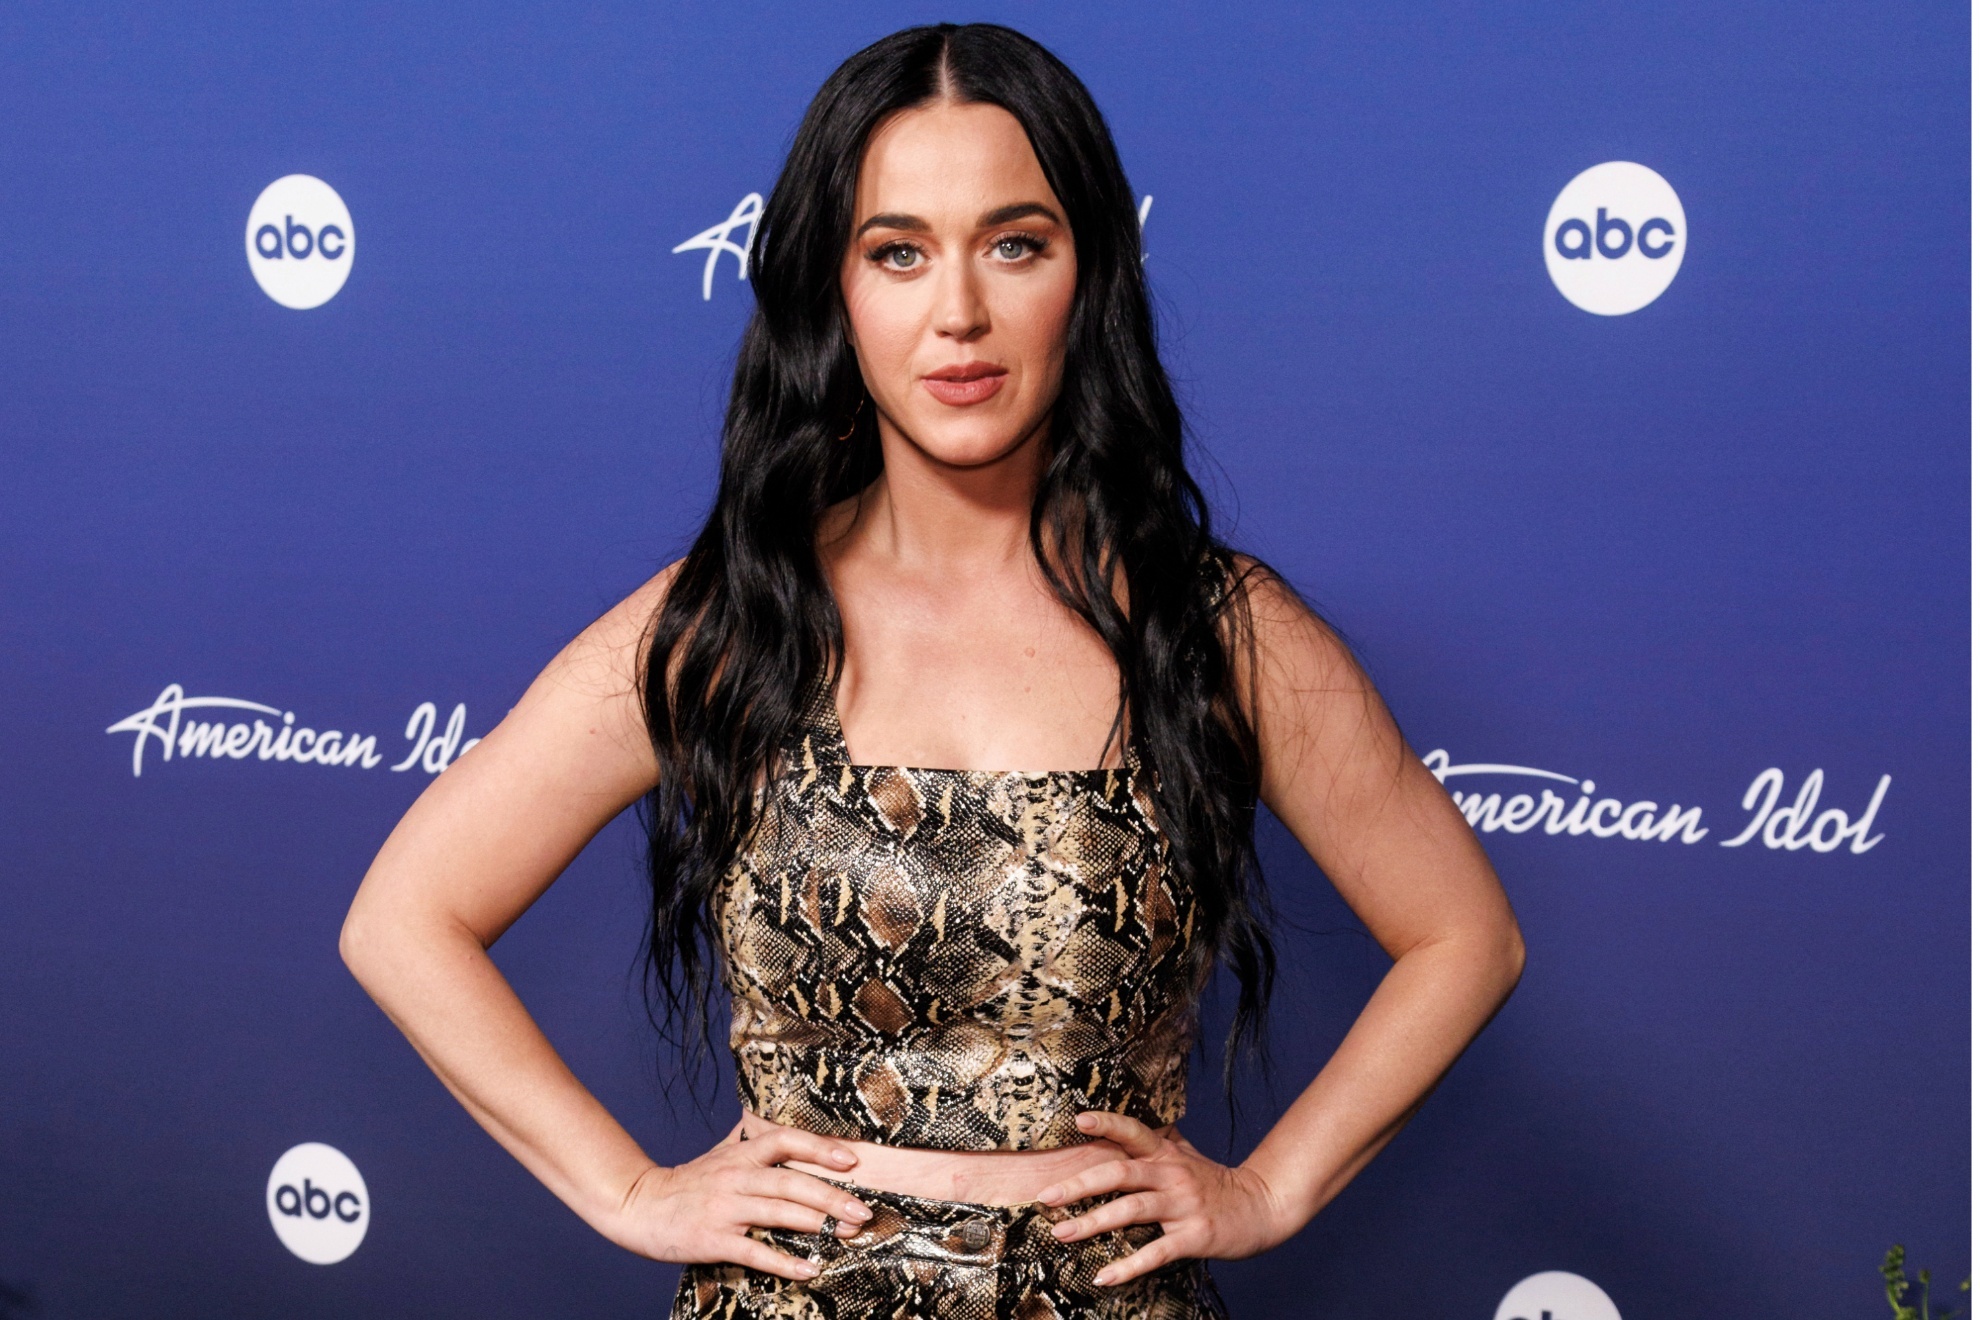 Katy Perry is rumored to quit American Idol to "focus on family"